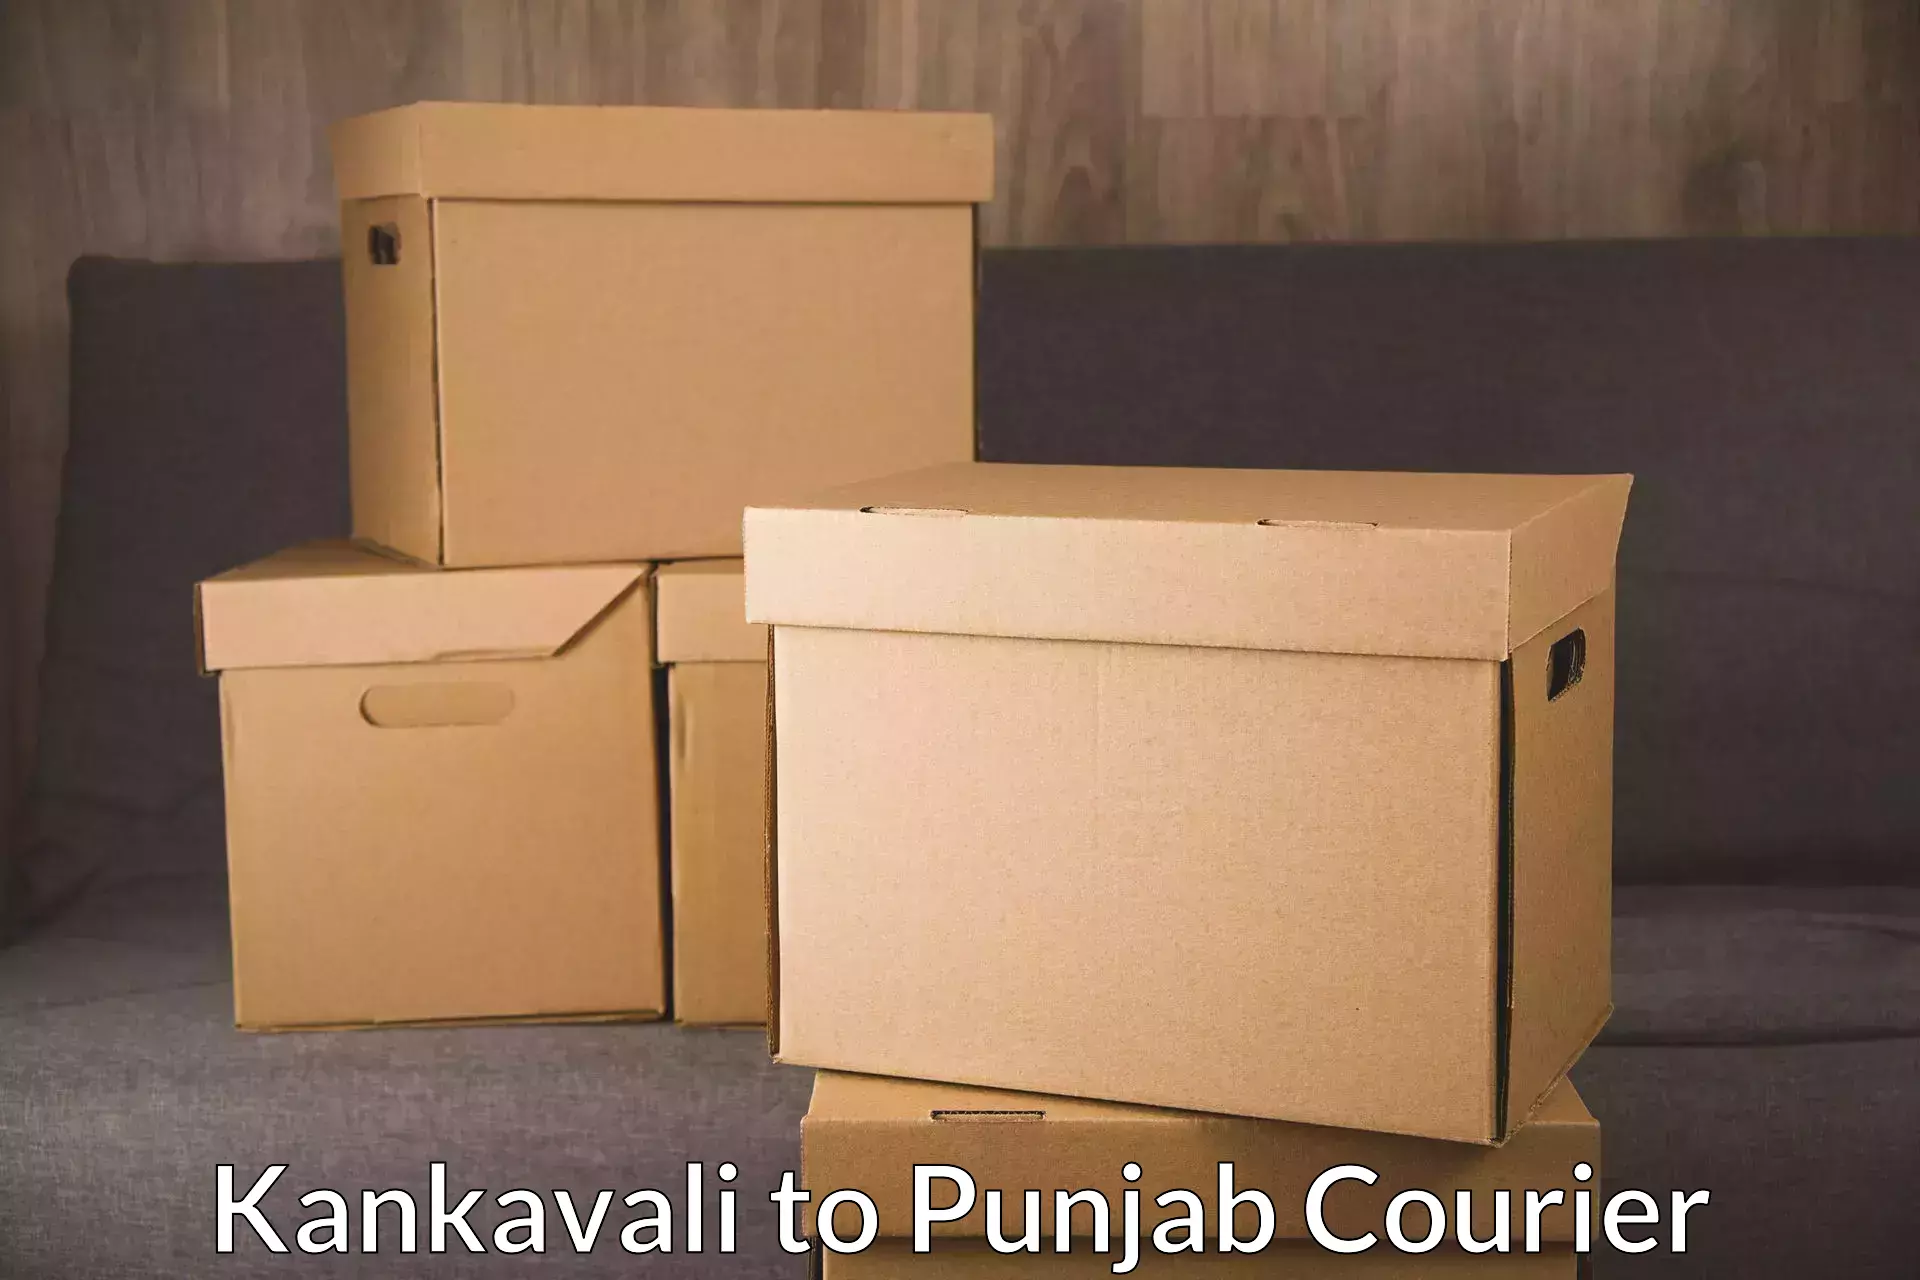 International courier networks Kankavali to Firozpur